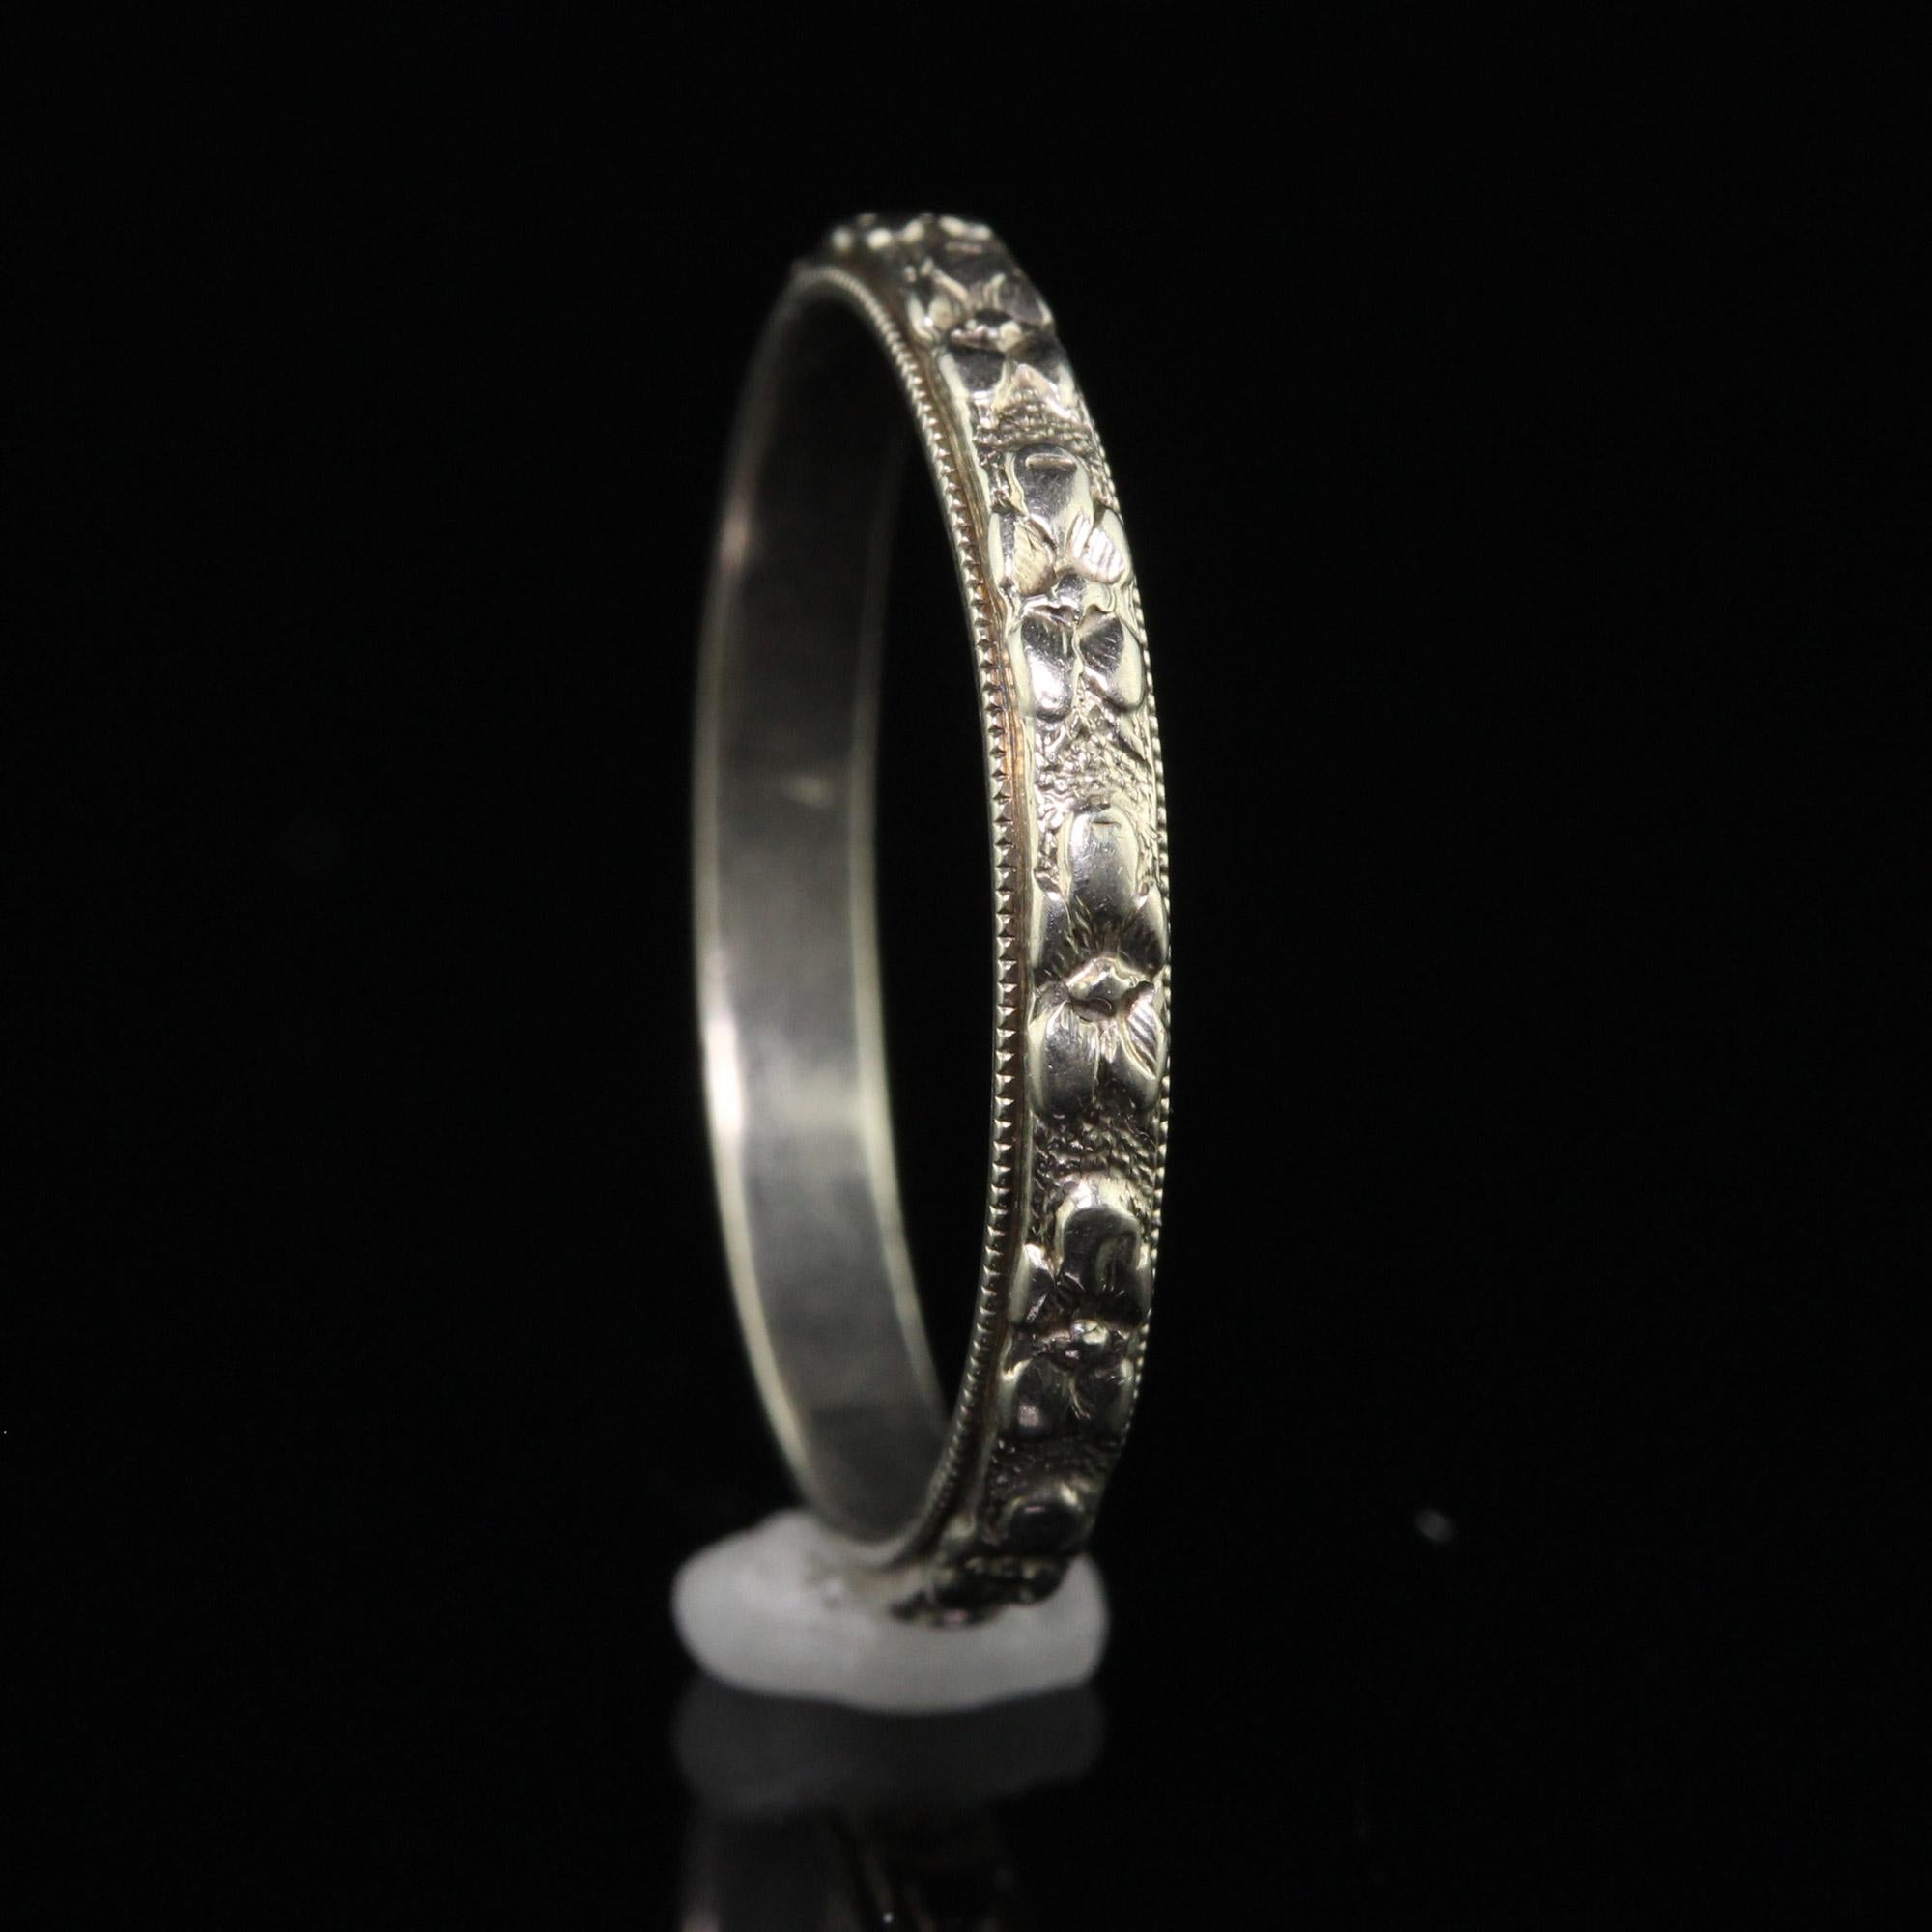 Women's Antique Art Deco 14K White Gold Floral Engraved Wedding Band - Size 6 For Sale